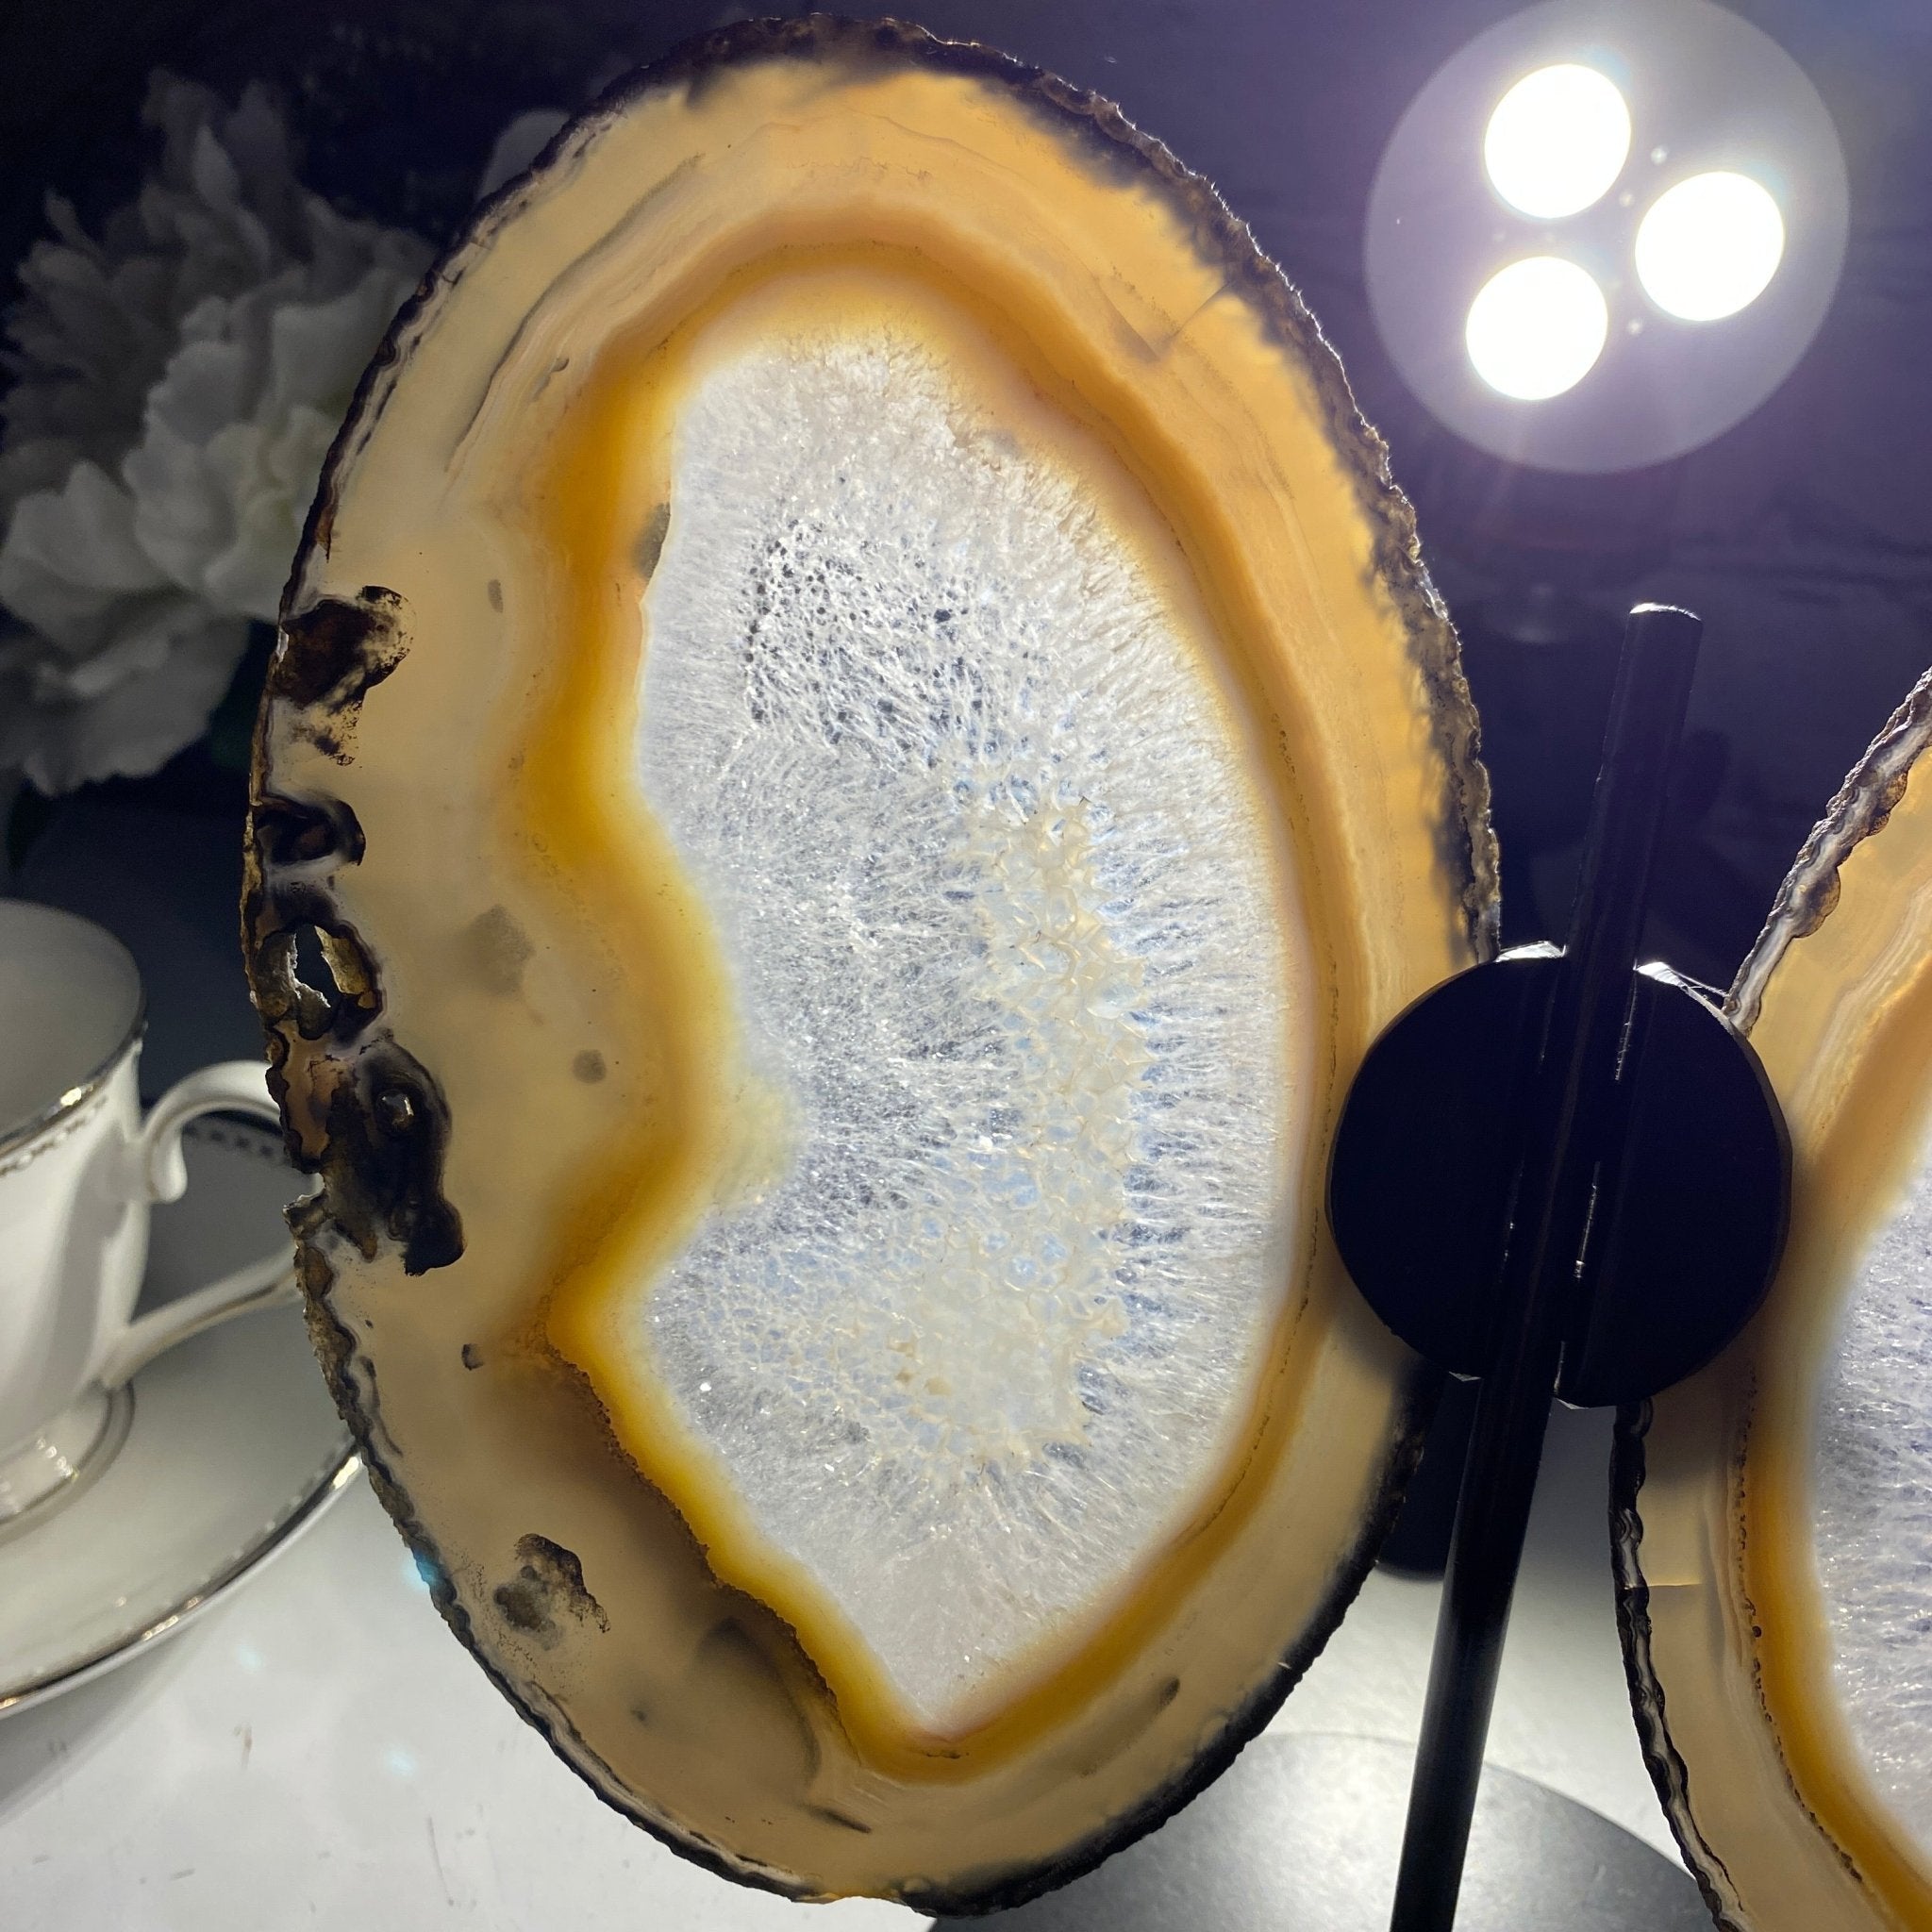 Natural Brazilian Agate "Butterfly" Slices, 8.3" Tall #5050NA-039 by Brazil Gems - Brazil GemsBrazil GemsNatural Brazilian Agate "Butterfly" Slices, 8.3" Tall #5050NA-039 by Brazil GemsAgate Butterfly Wings5050NA-039